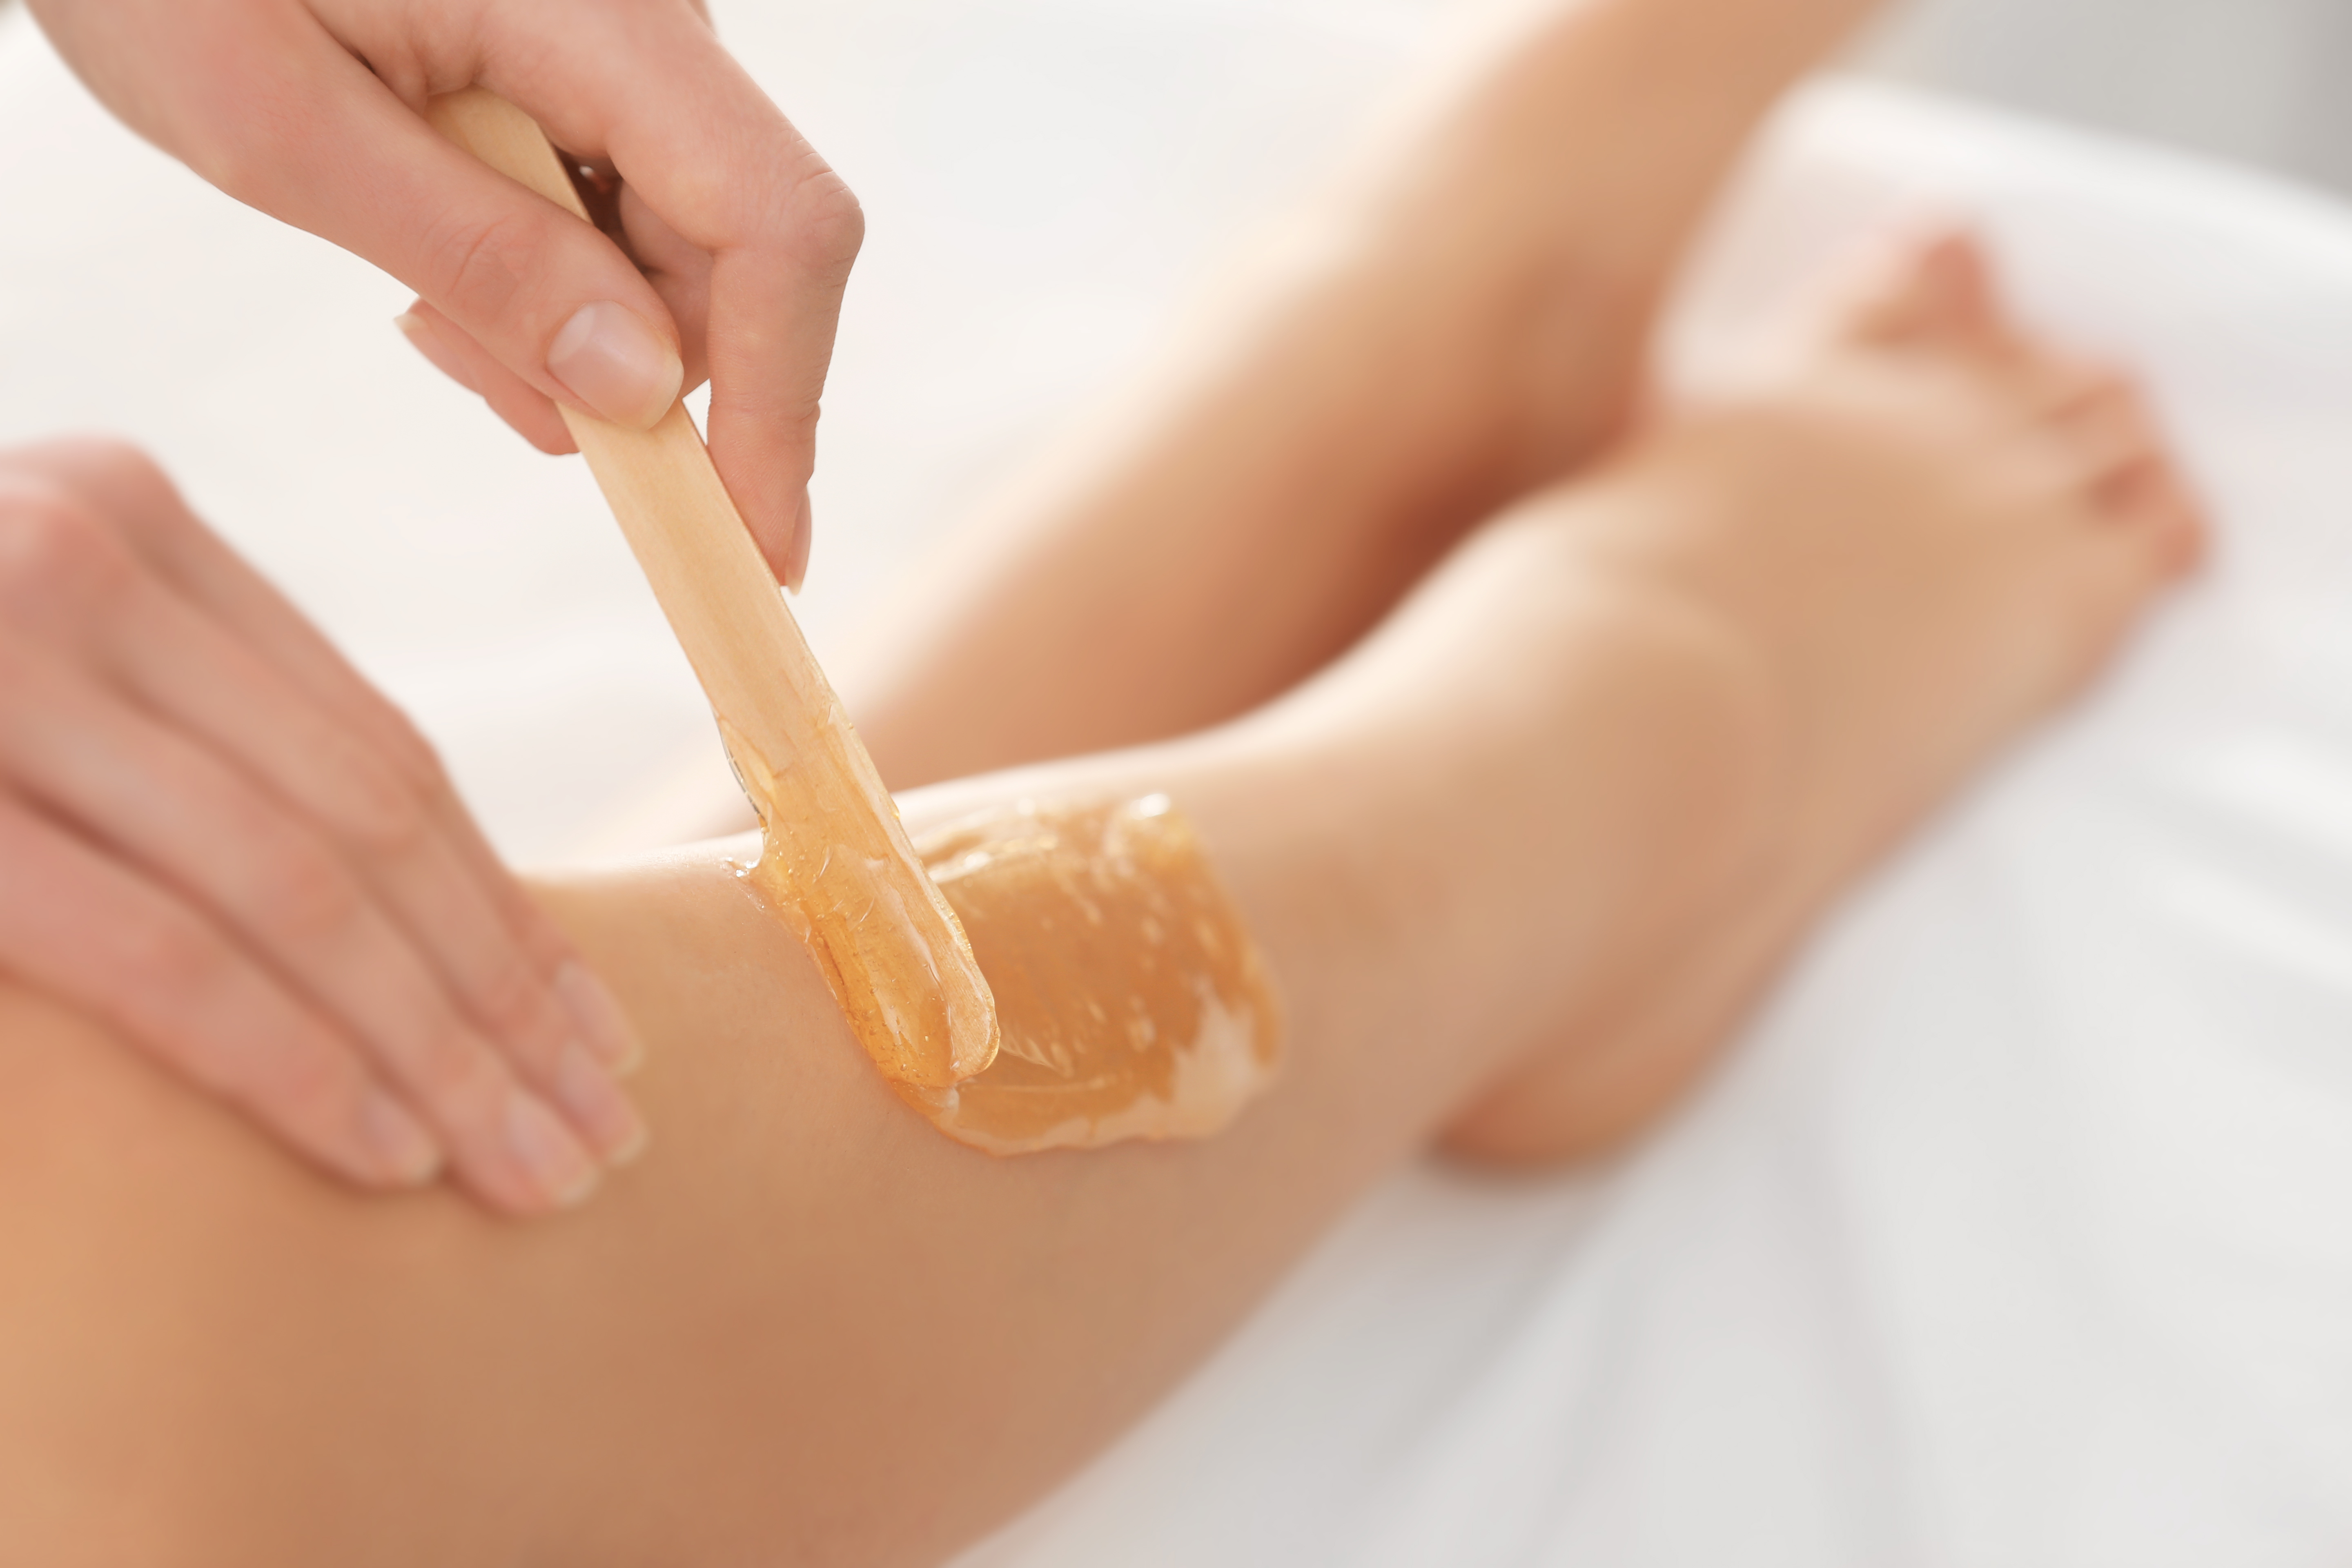 4 Reasons Why Waxing Is Better Than Shaving